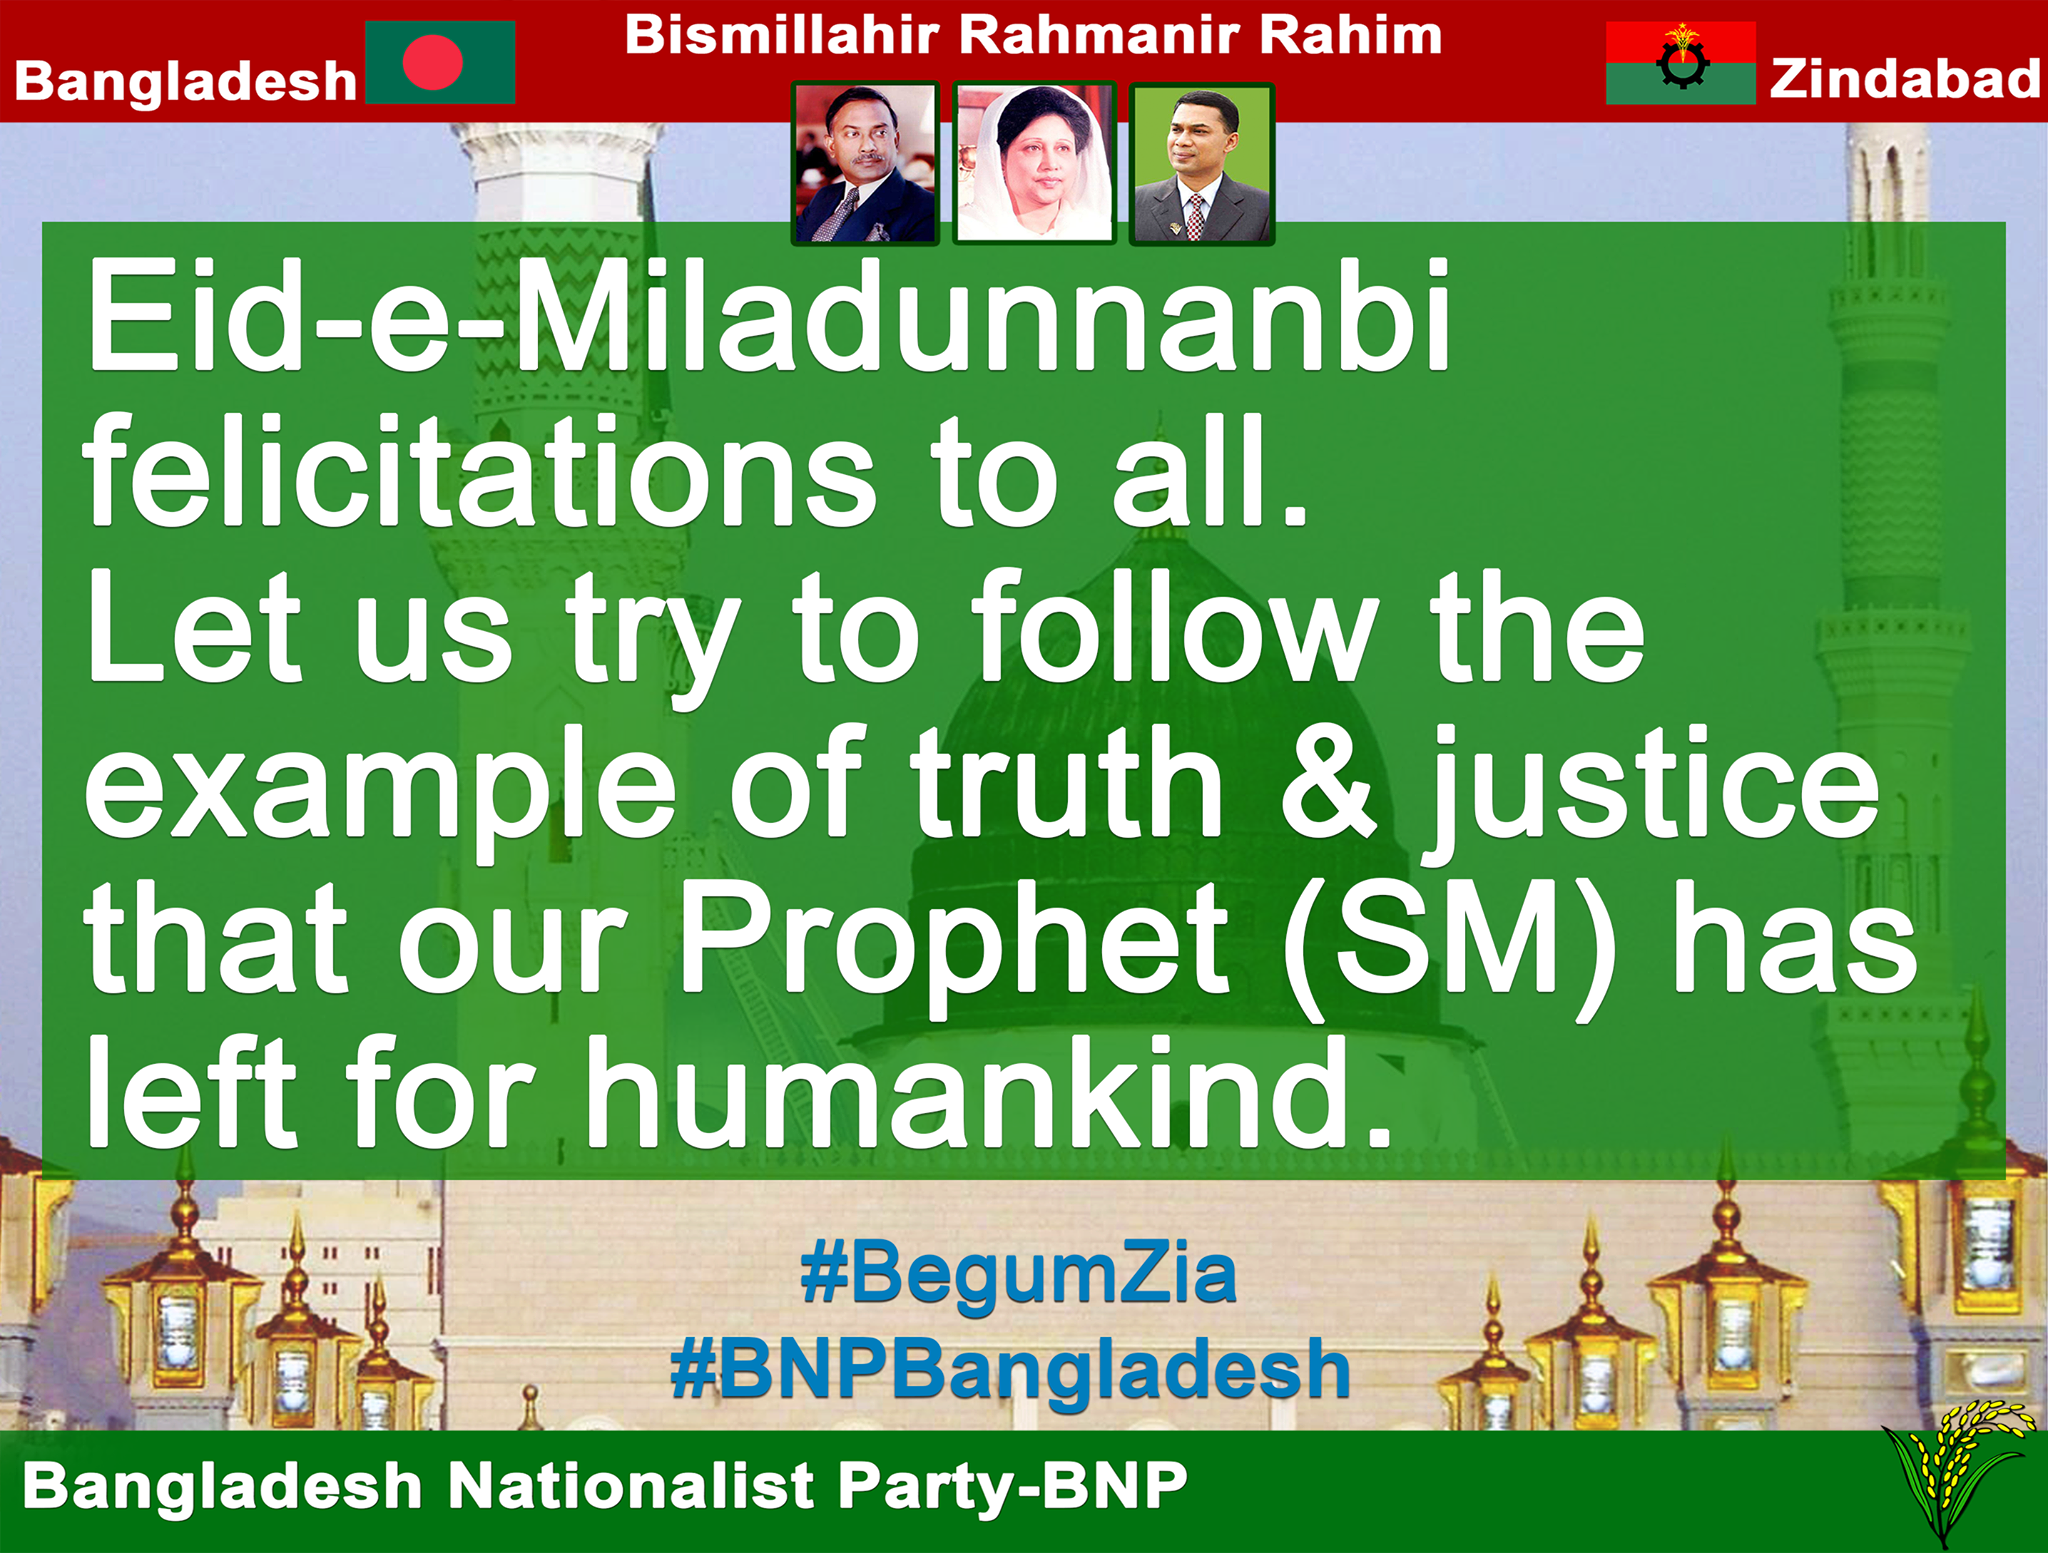 Begum Khaleda Zia On Twitter Eid E Miladunnanbi Felicitations To All Let Us Try To Follow The Example Of Truth Justice That Our Prophet Sm Has Left For Humankind Https T Co Utkosbdy9v